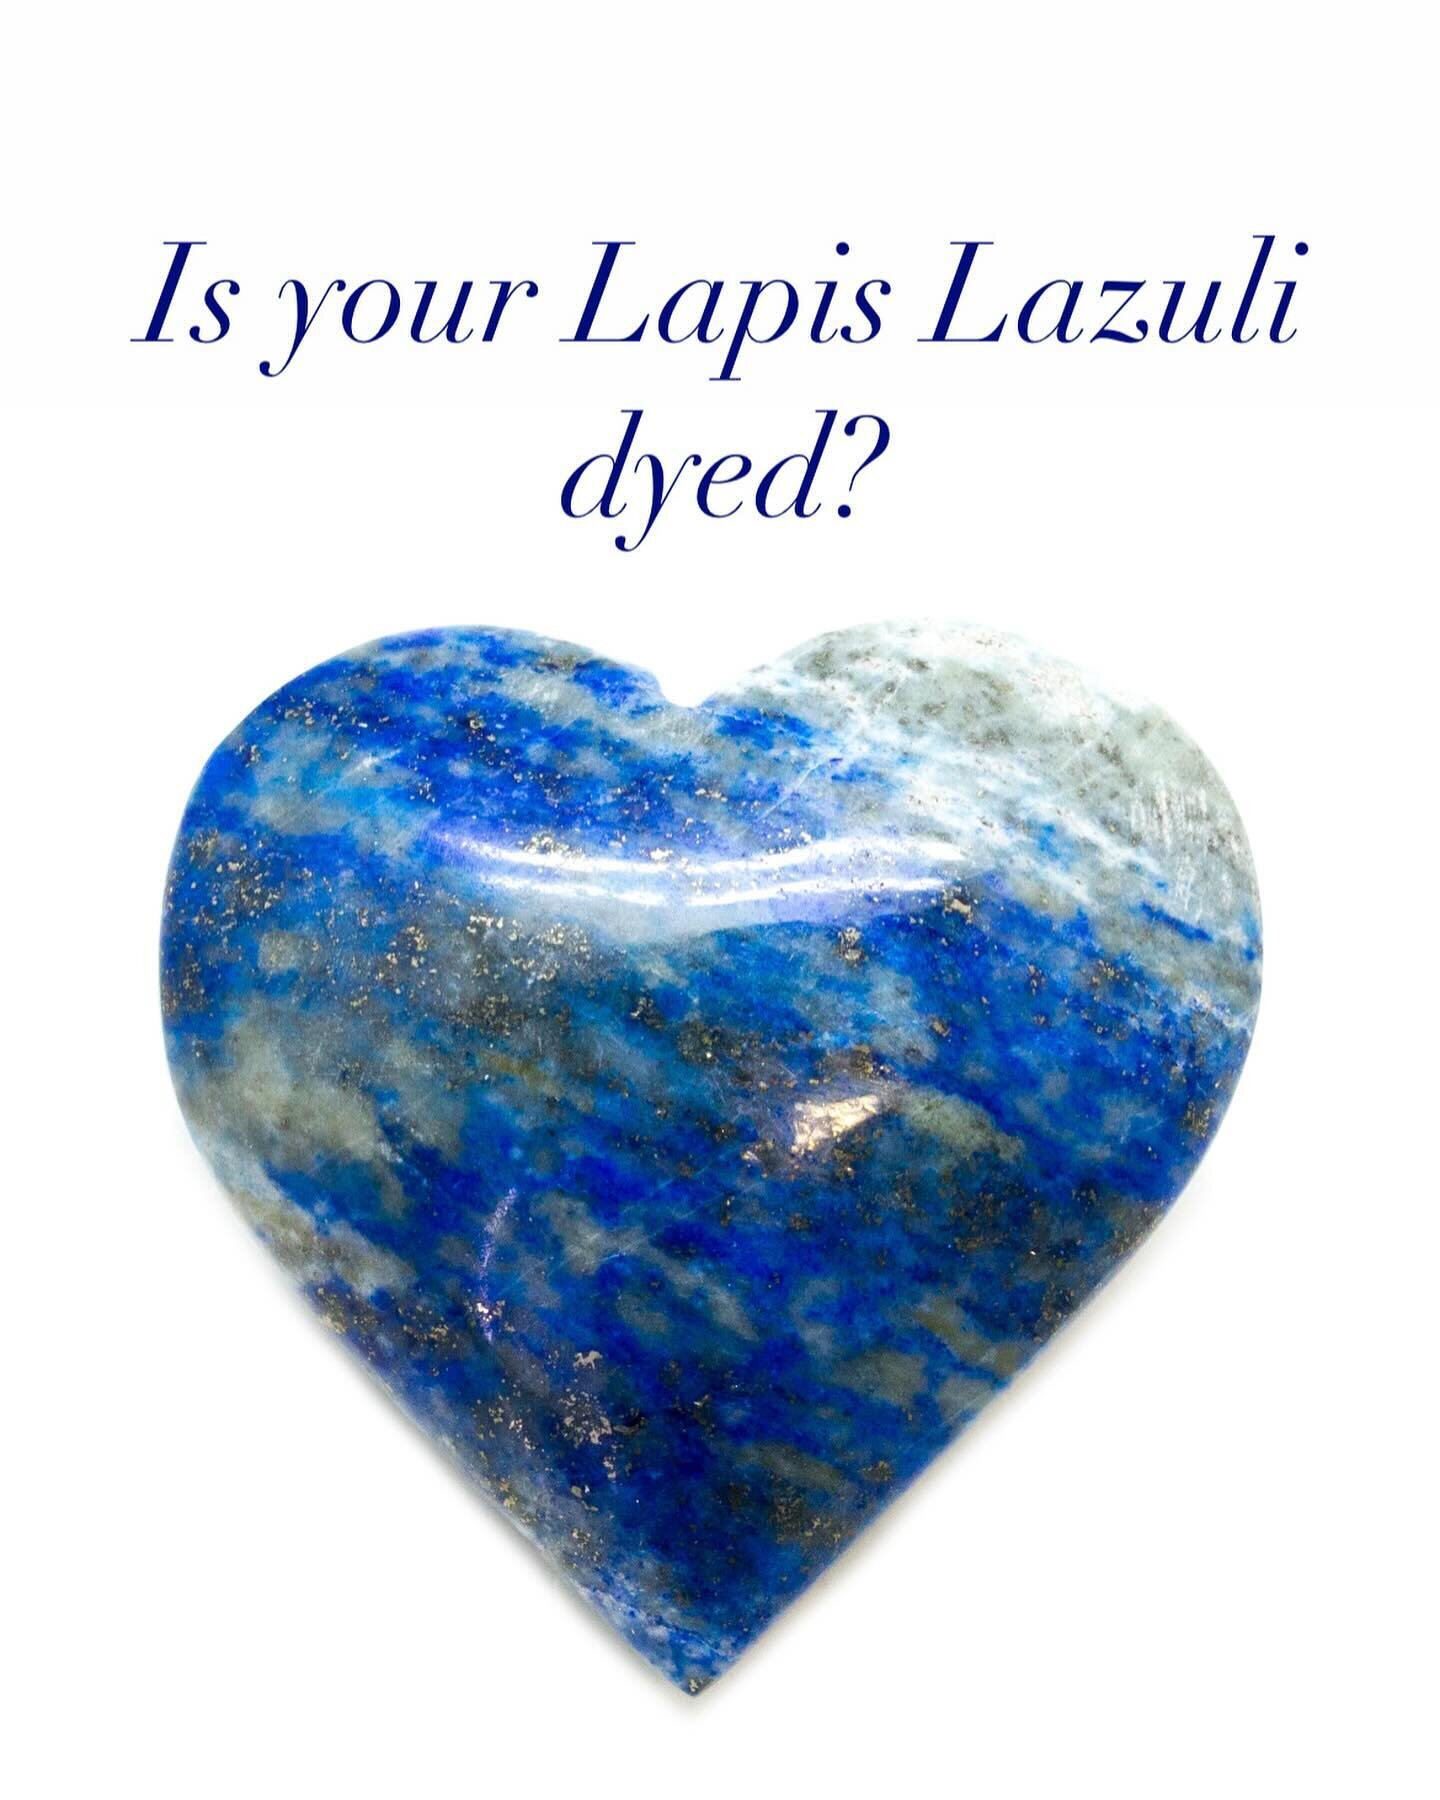 The popularity of Lapis Lazuli has kickstarted a big market for fakes.

So how can you tell if your lapis is made of plastic, is actually Sodalite that has been altered to look like Lapis, or just really poor quality Lapis that has been dyed darker t